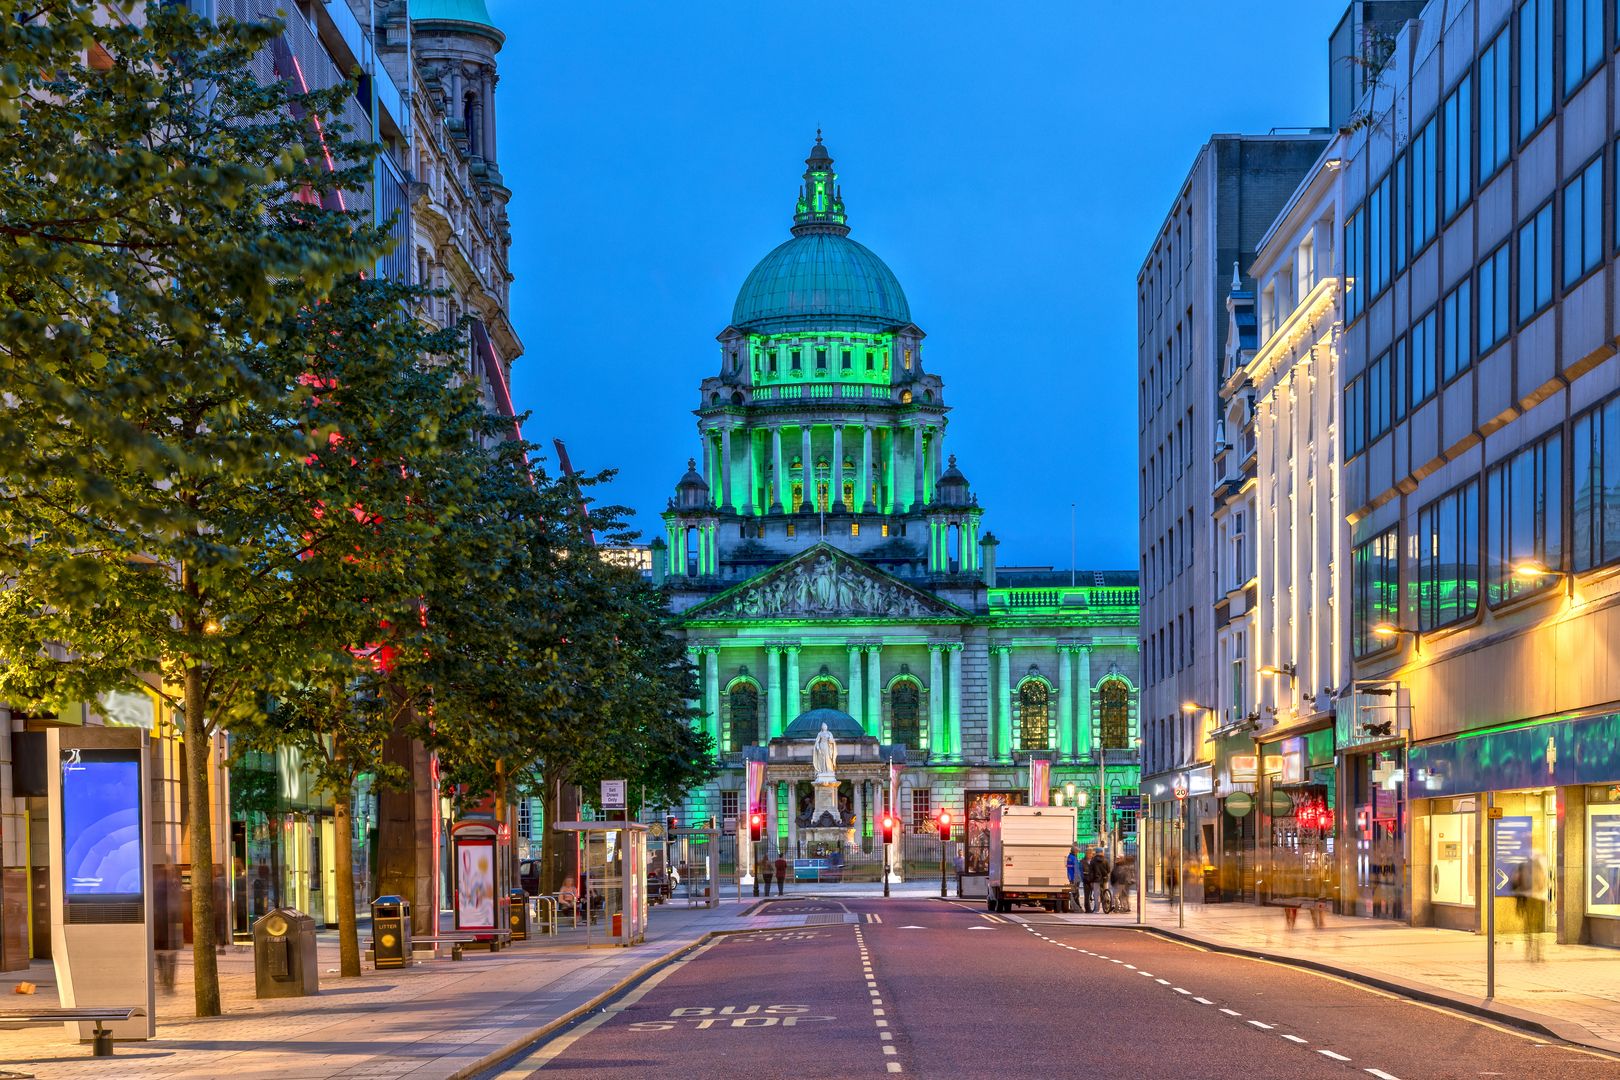 The Belfast City Hall at Donegall Square in Belfast, Northern Ireland at Night
